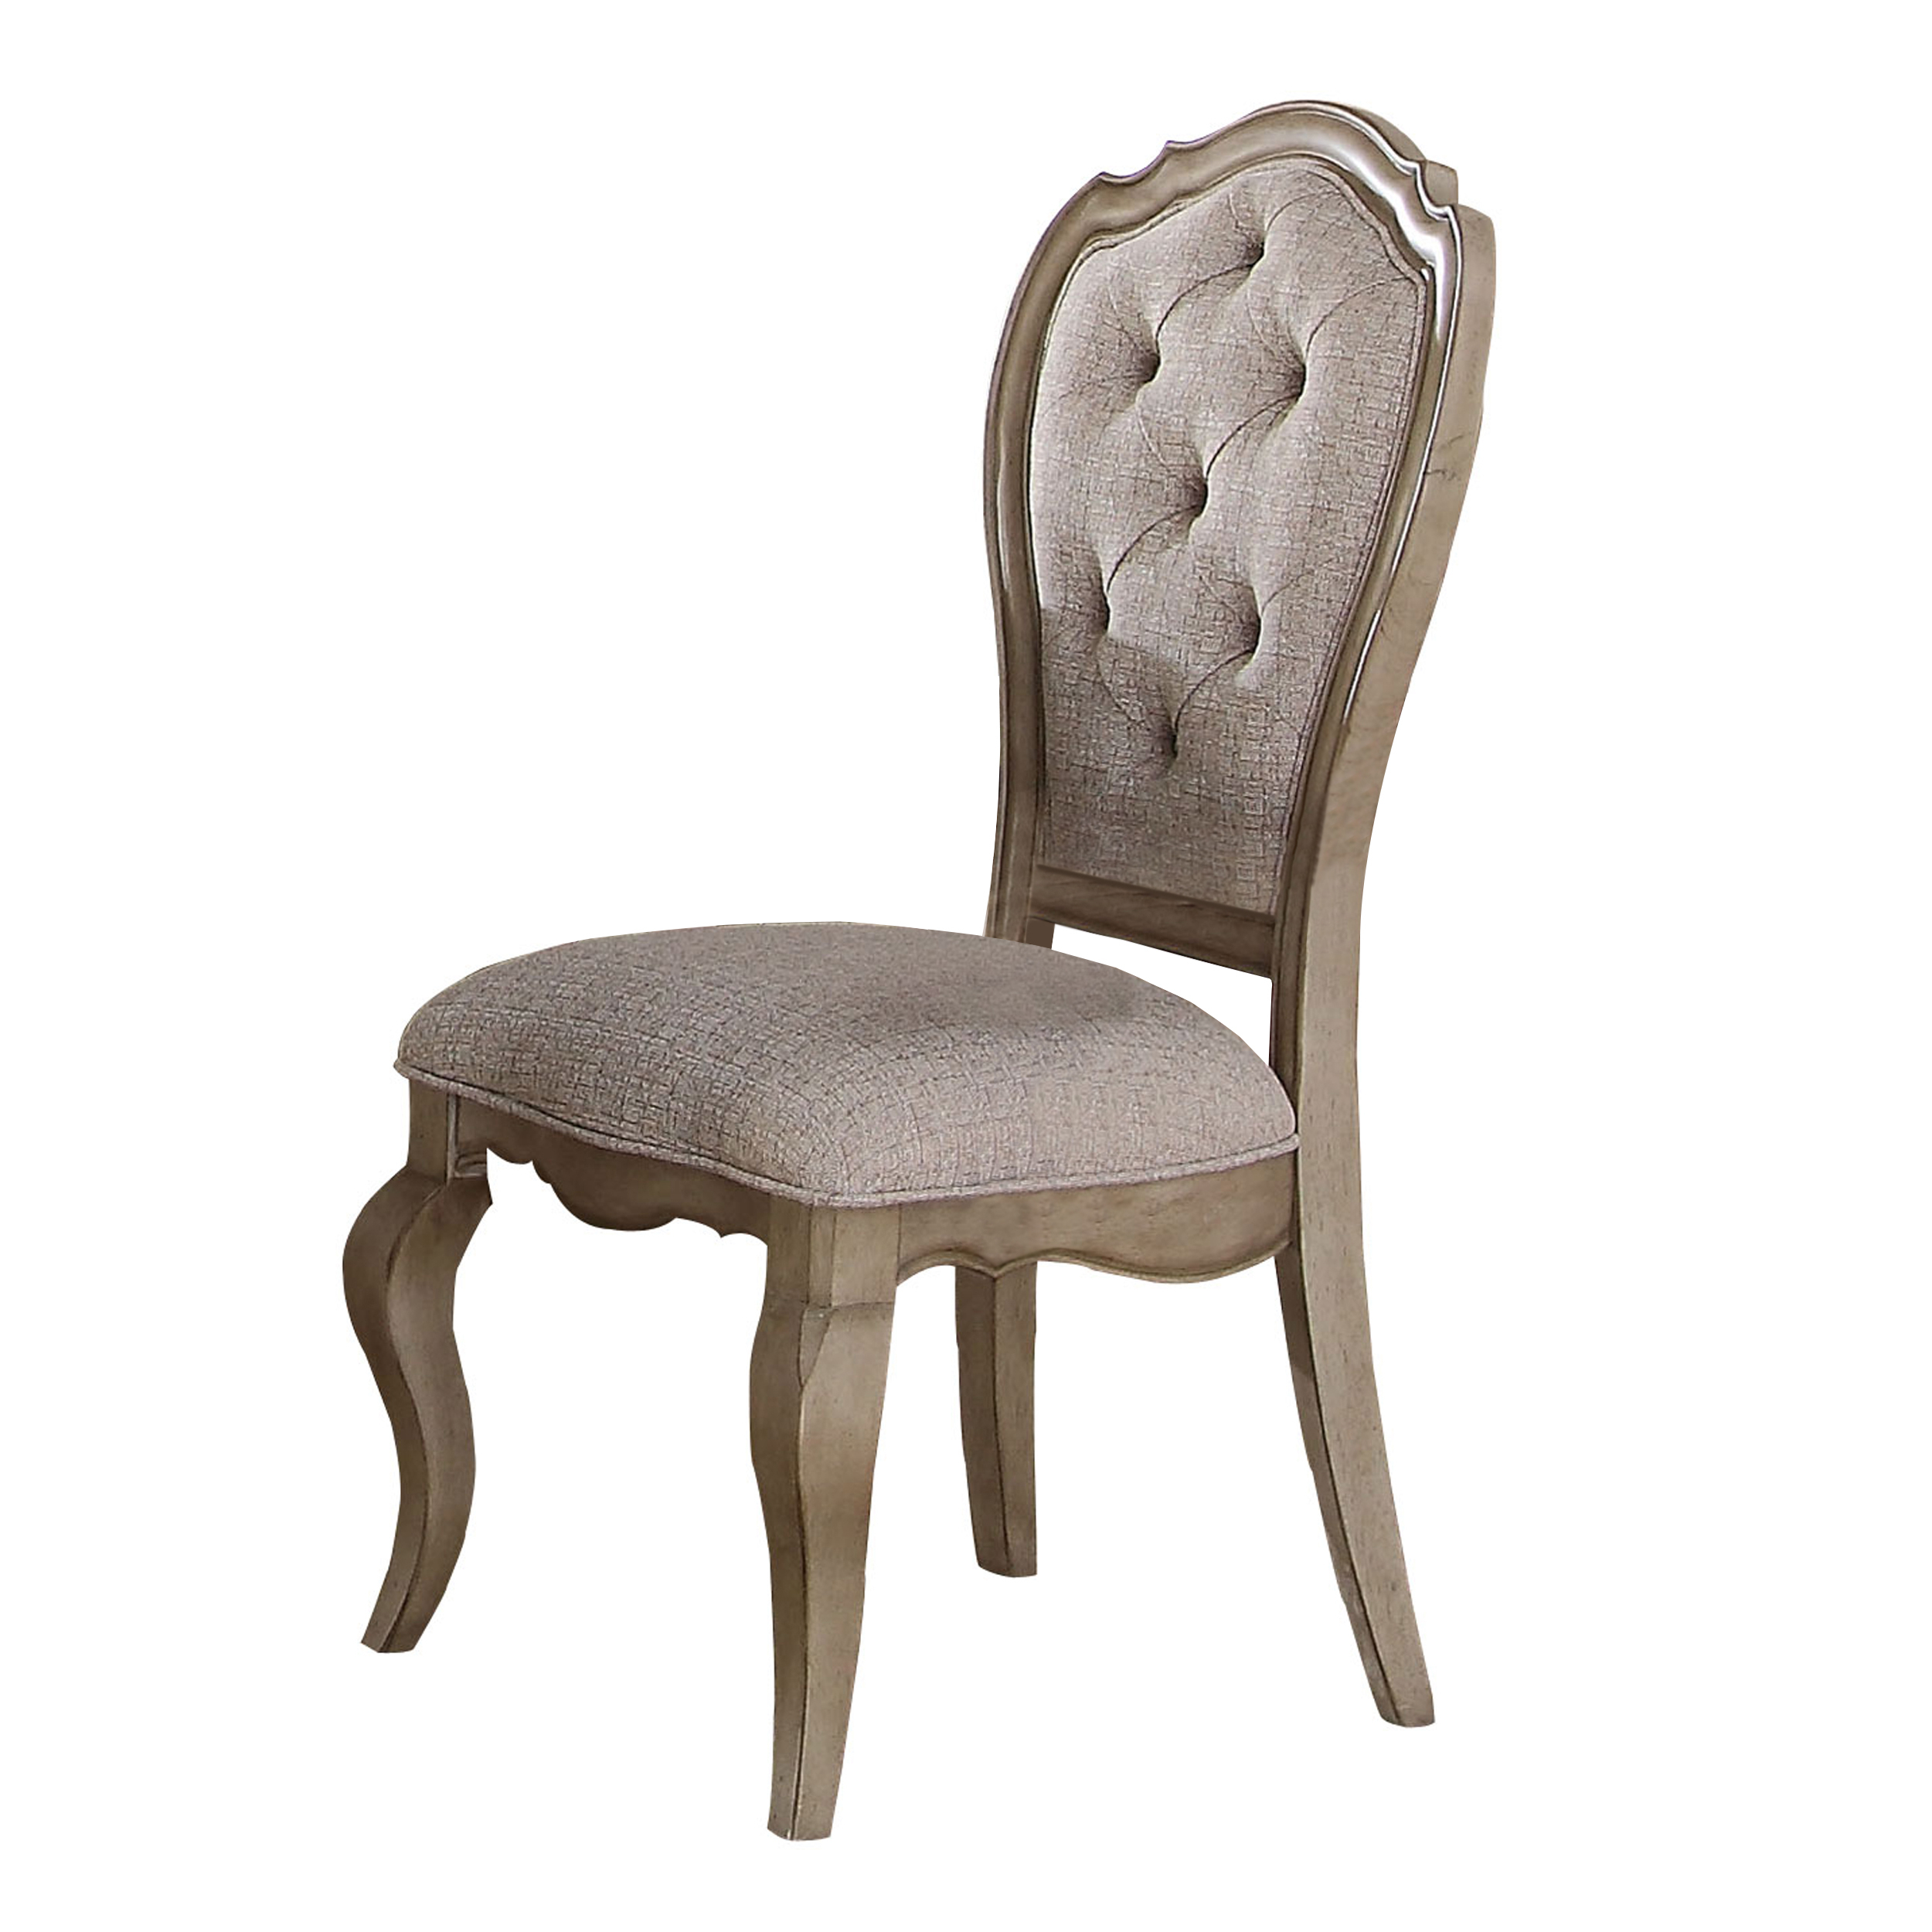 Button Tufted Upholstered Dining Side Chair, Set Of 2, Beige- Saltoro Sherpi